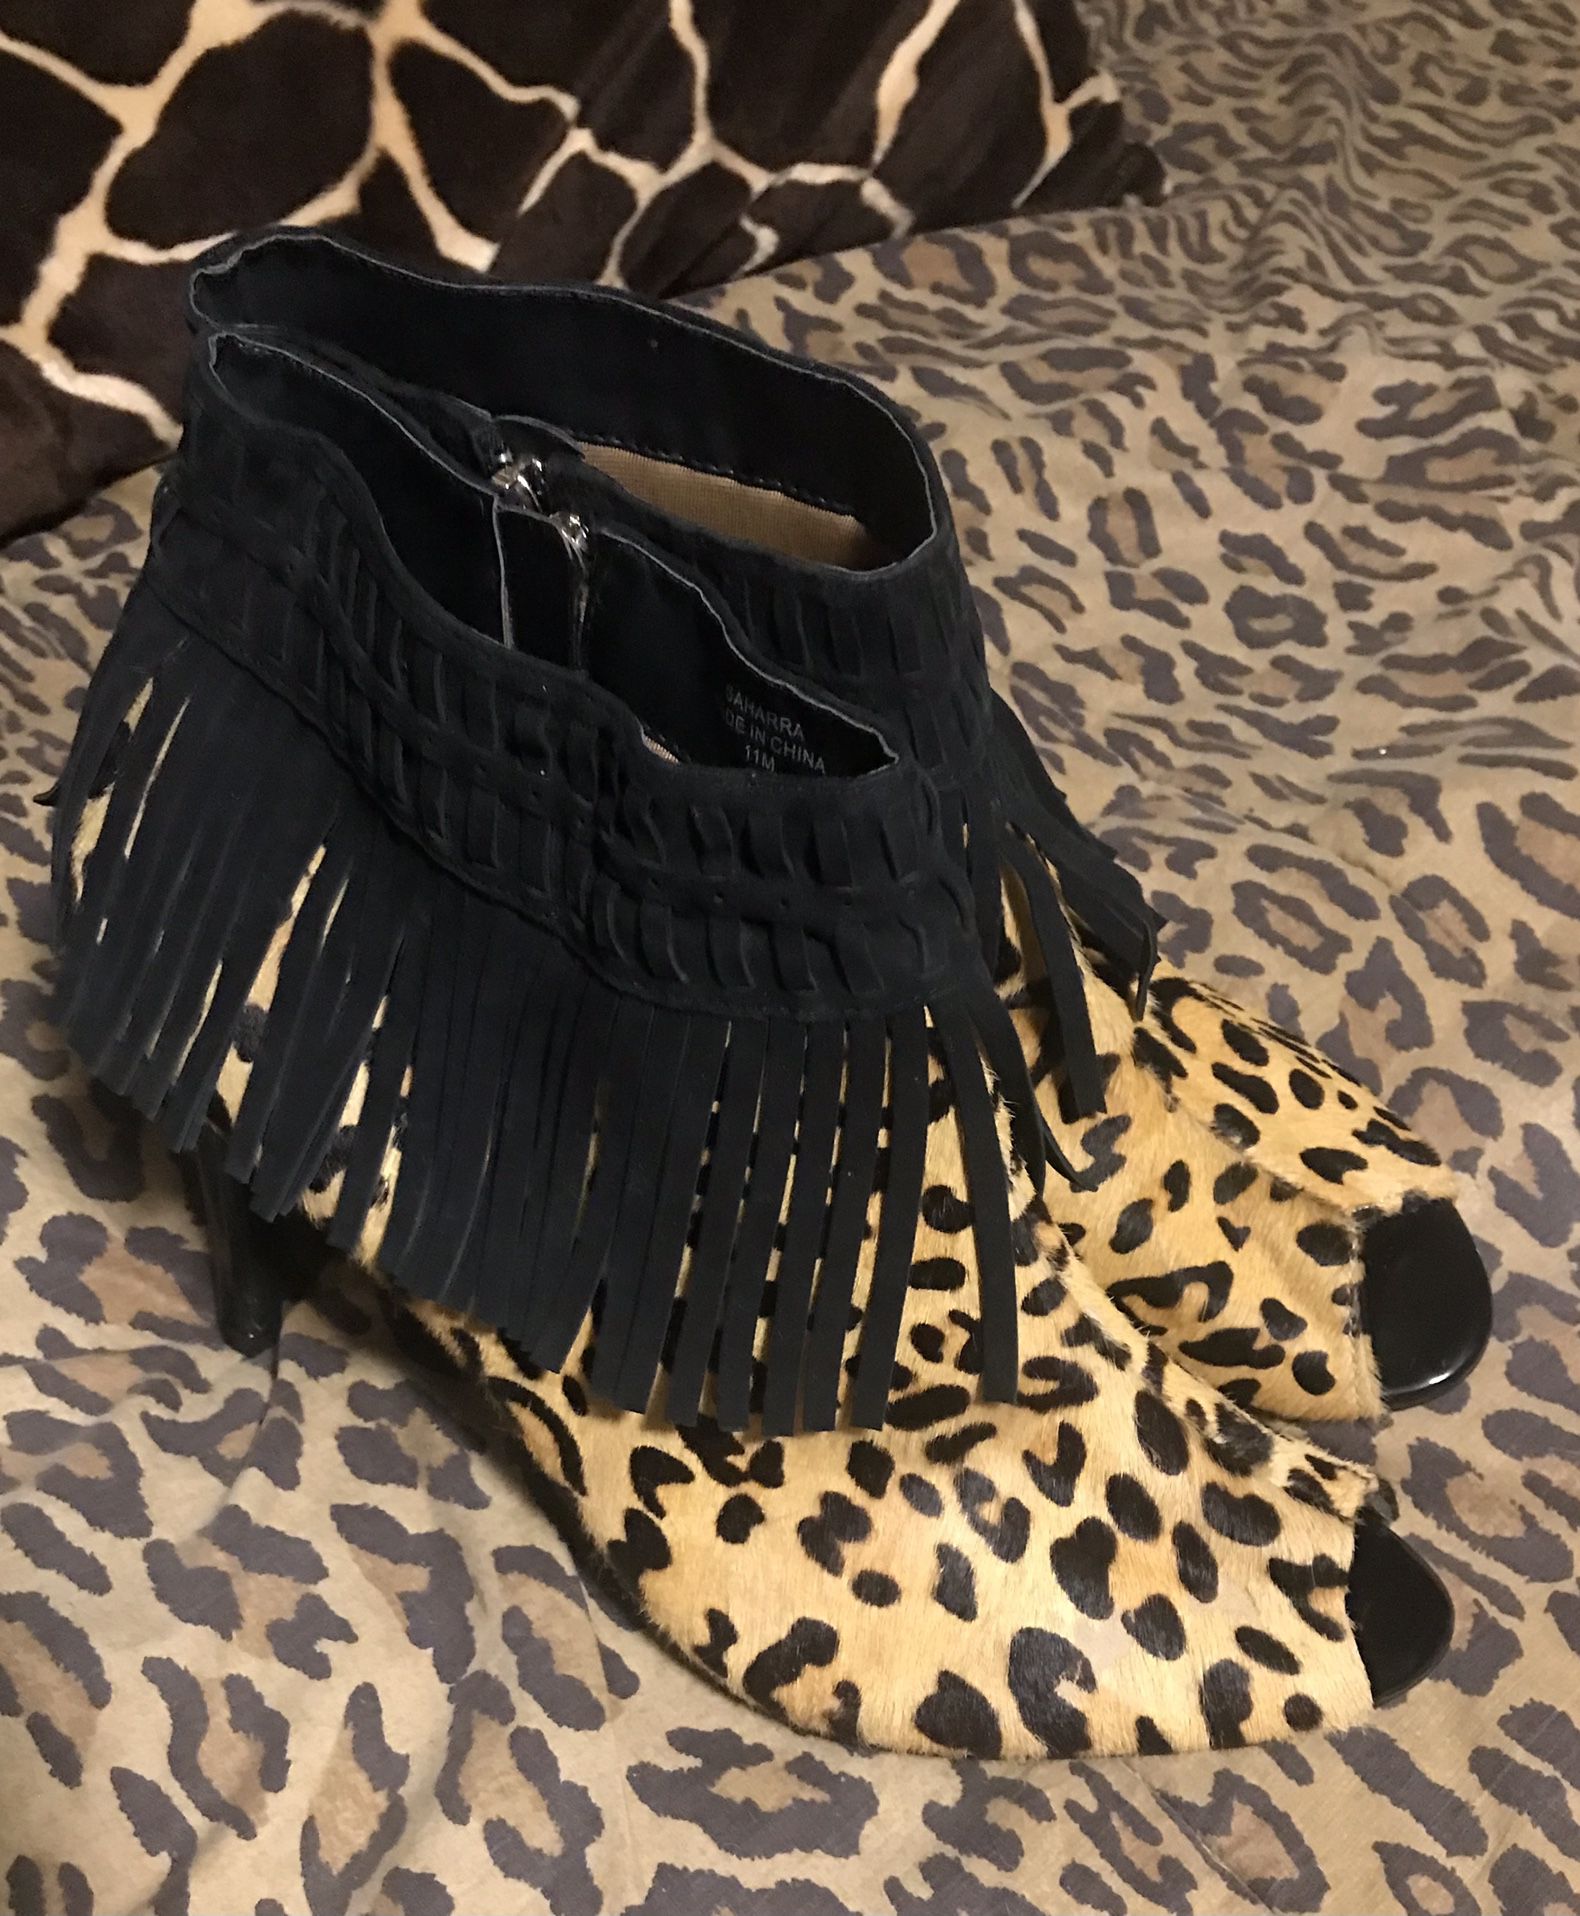 Leopard Fringe Heal Boots Size 11M *New*